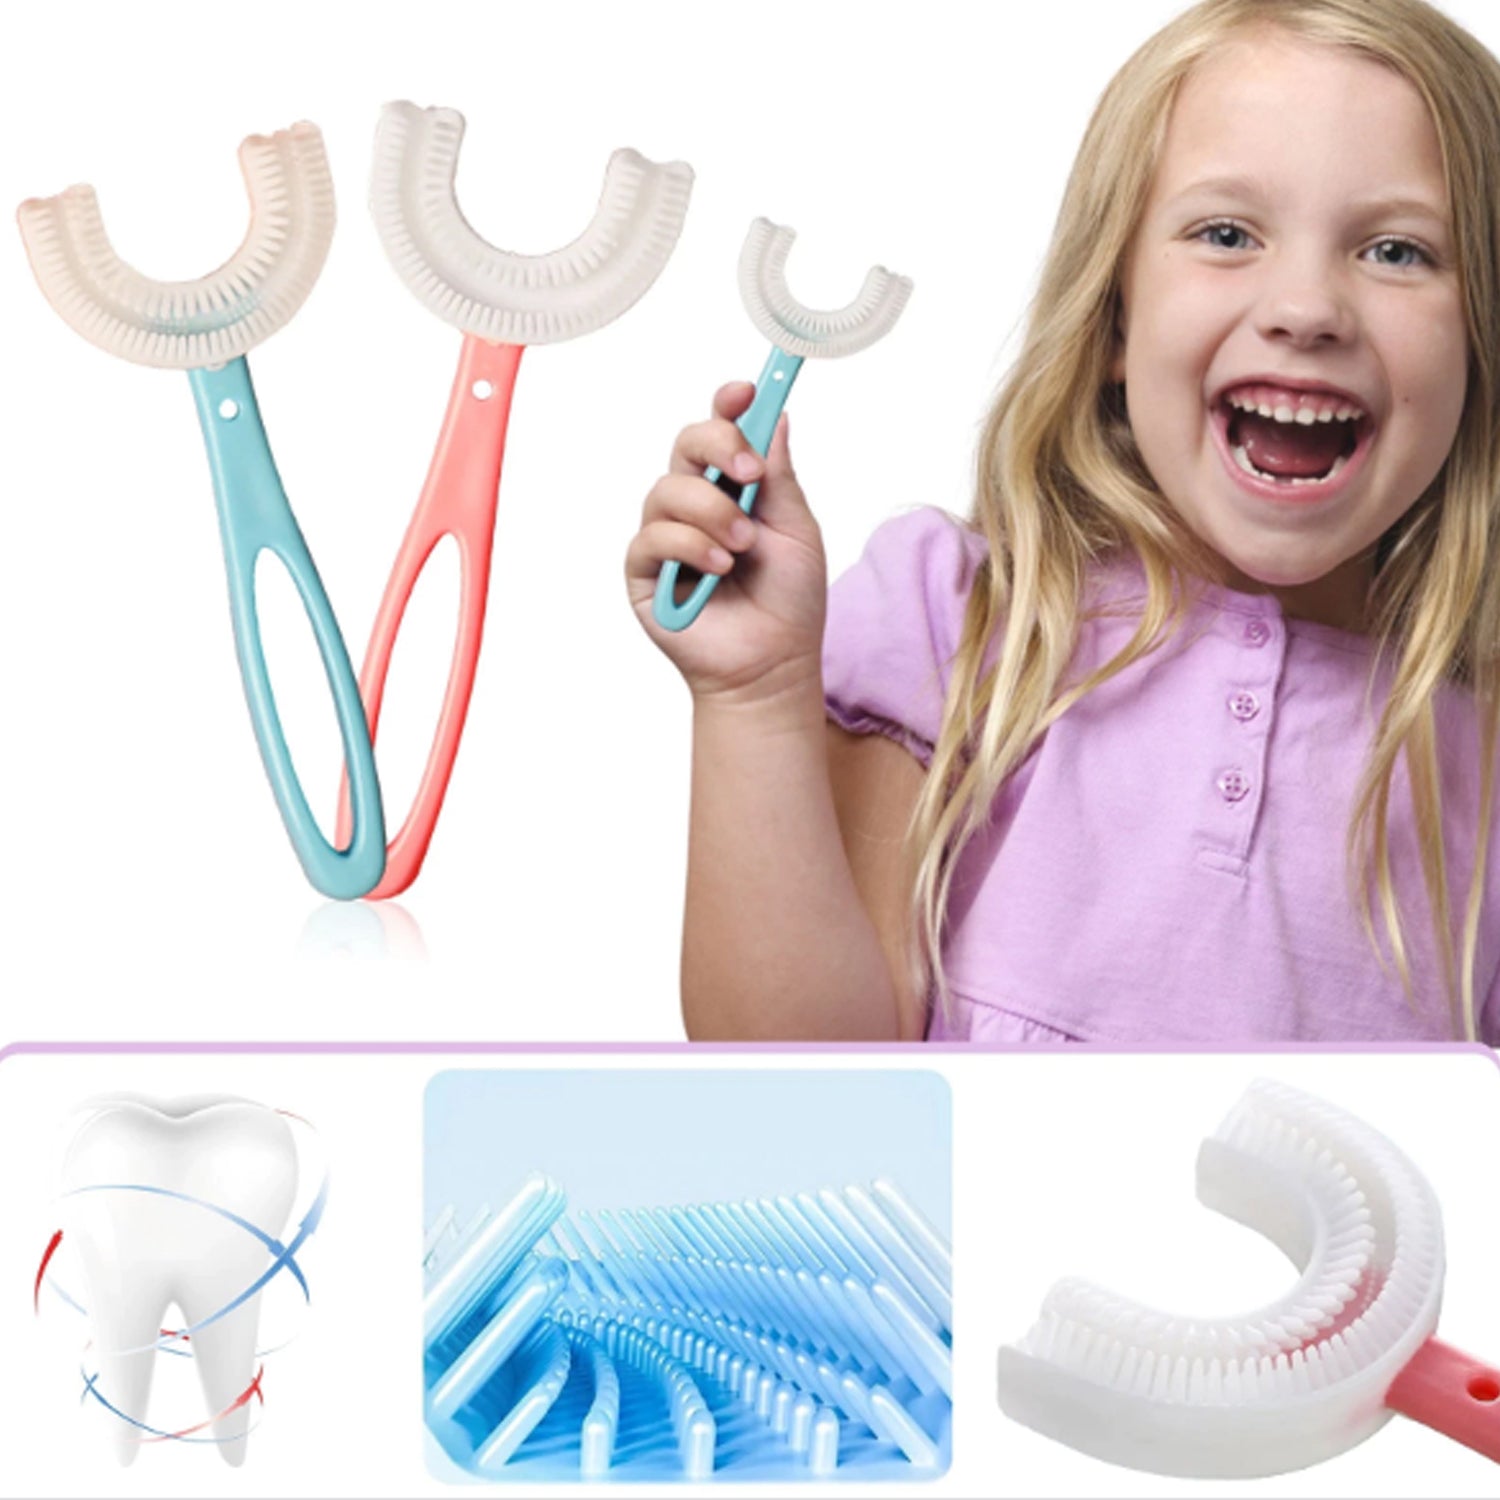 4773 Kids U Shaped Large Tooth Brush used in all kinds of household bathroom places for washing teeth of kids, toddlers and children’s easily and comfortably. DeoDap